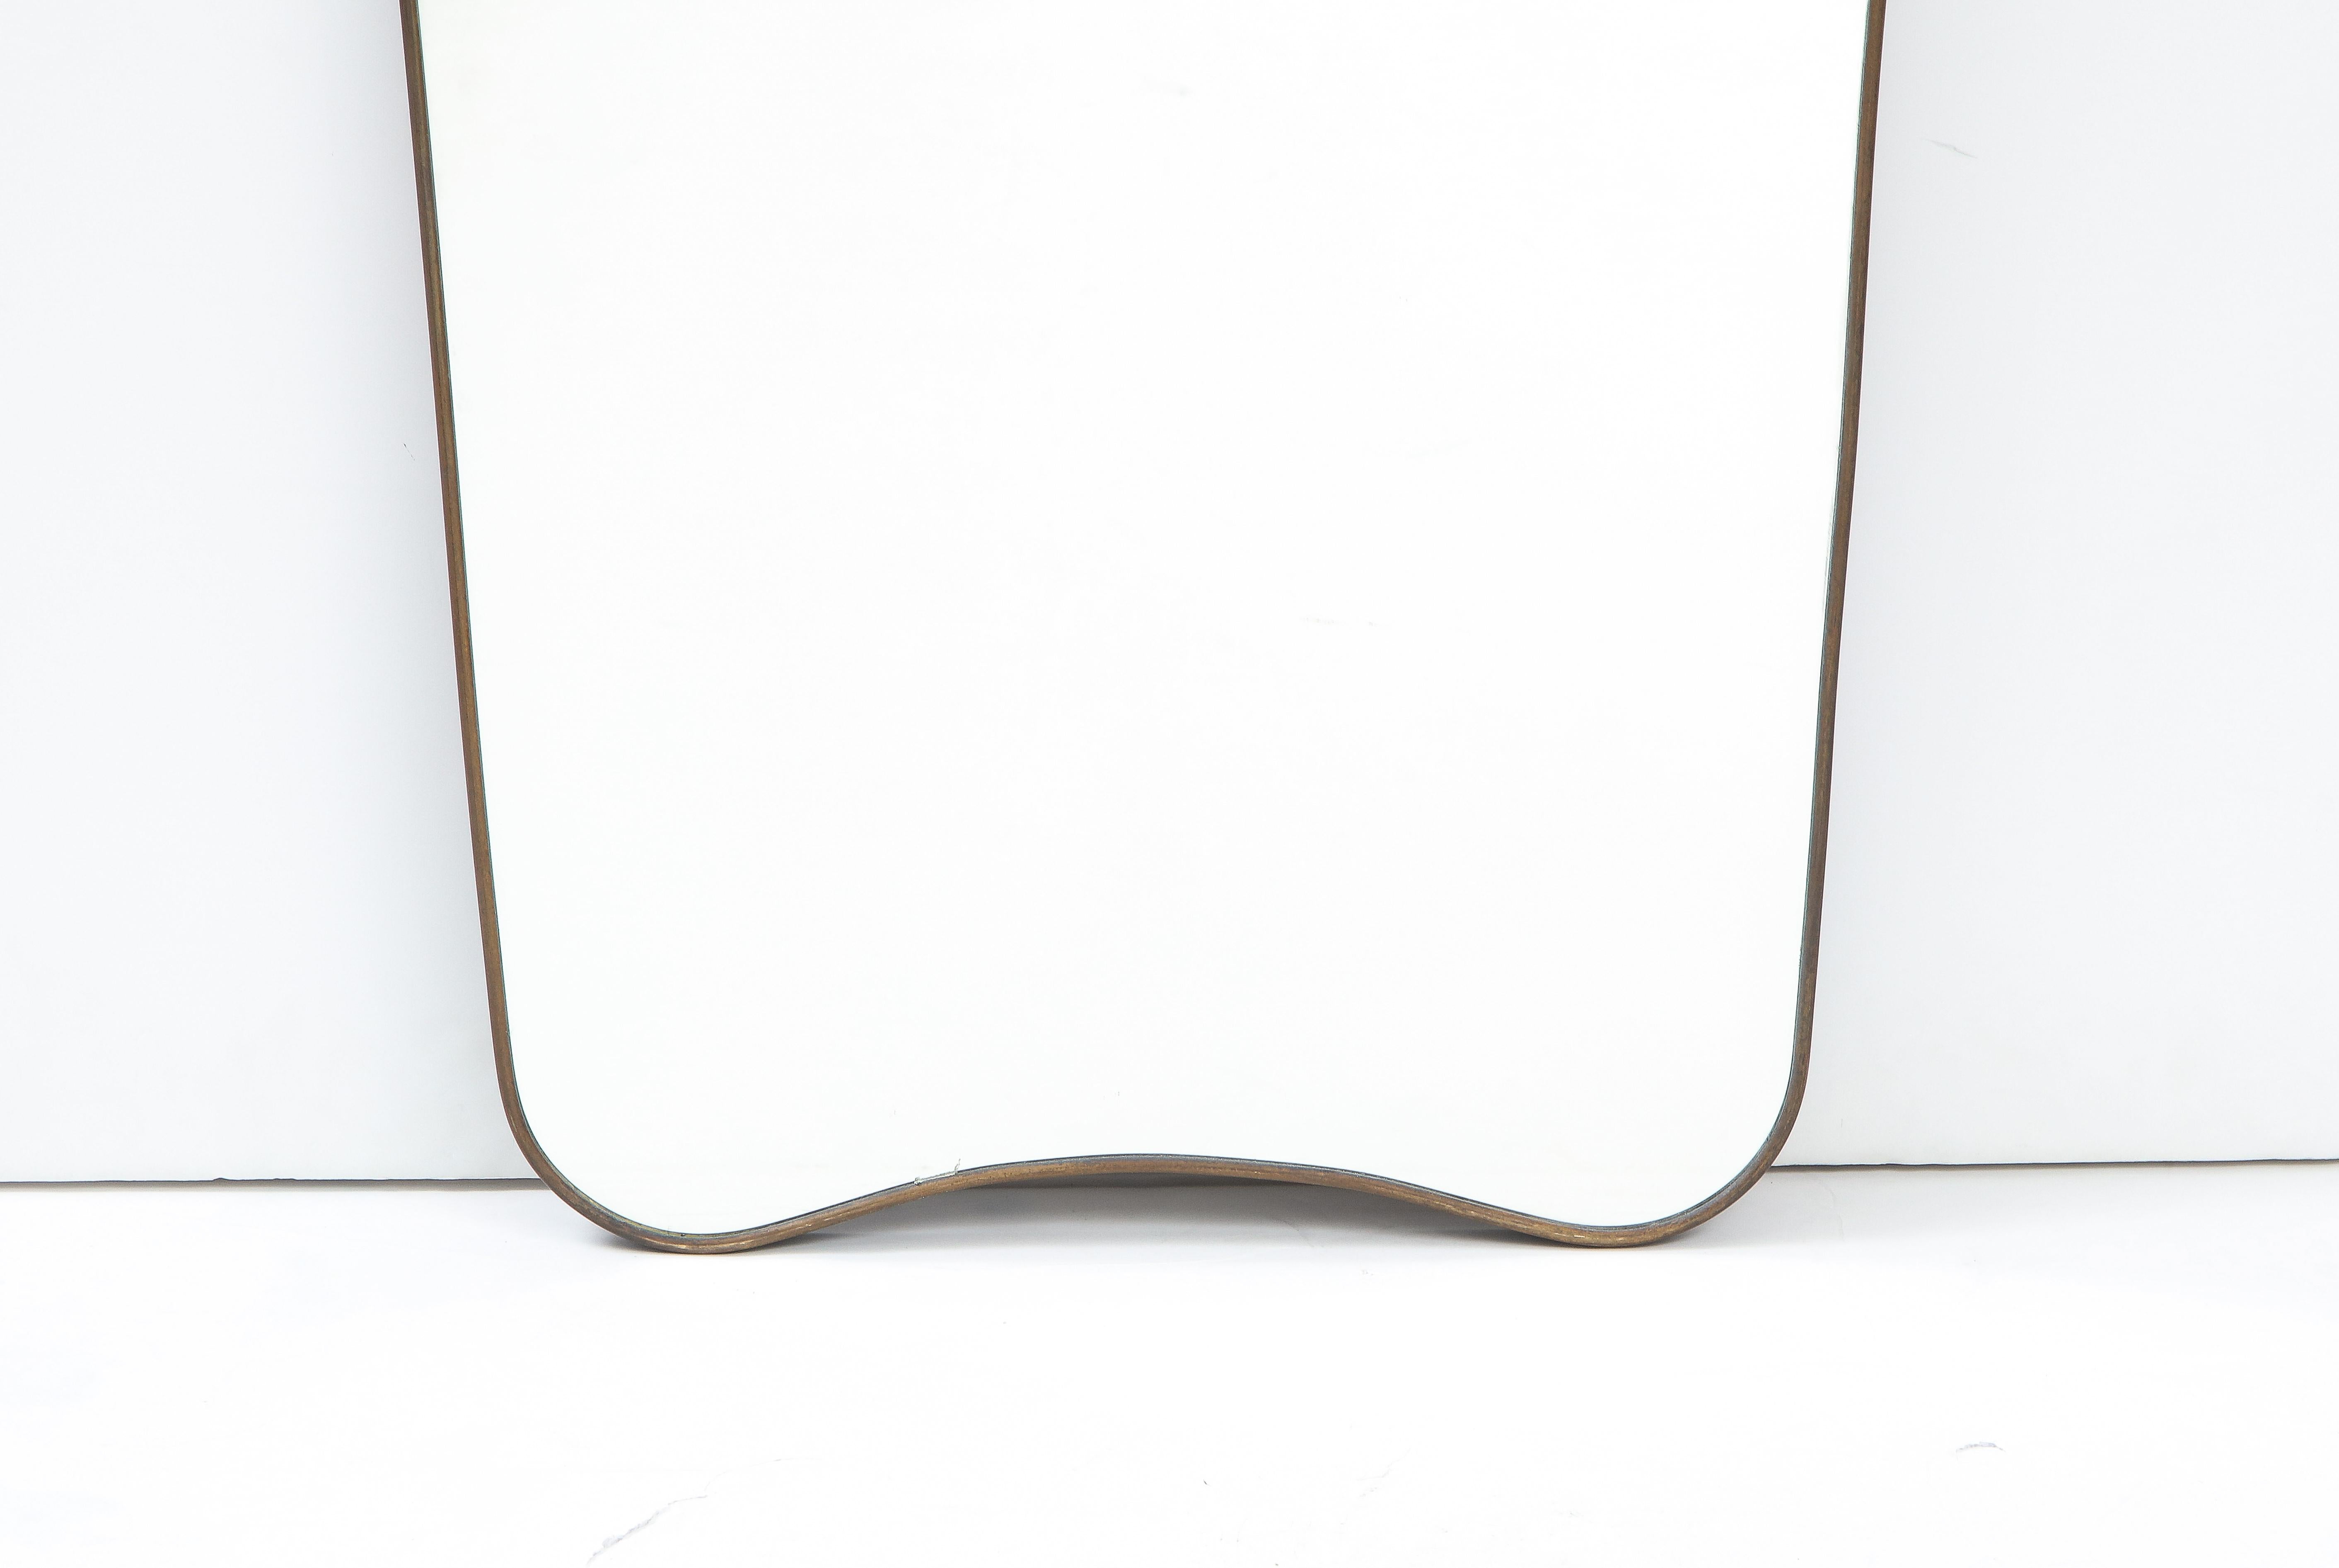 Italian modernist brass elegantly elongated and tapered mirror of grand scale and with beautiful original brass patina. The top has a simple arch, echoed also at the base. This very simple and classic Italian design would complement any interior